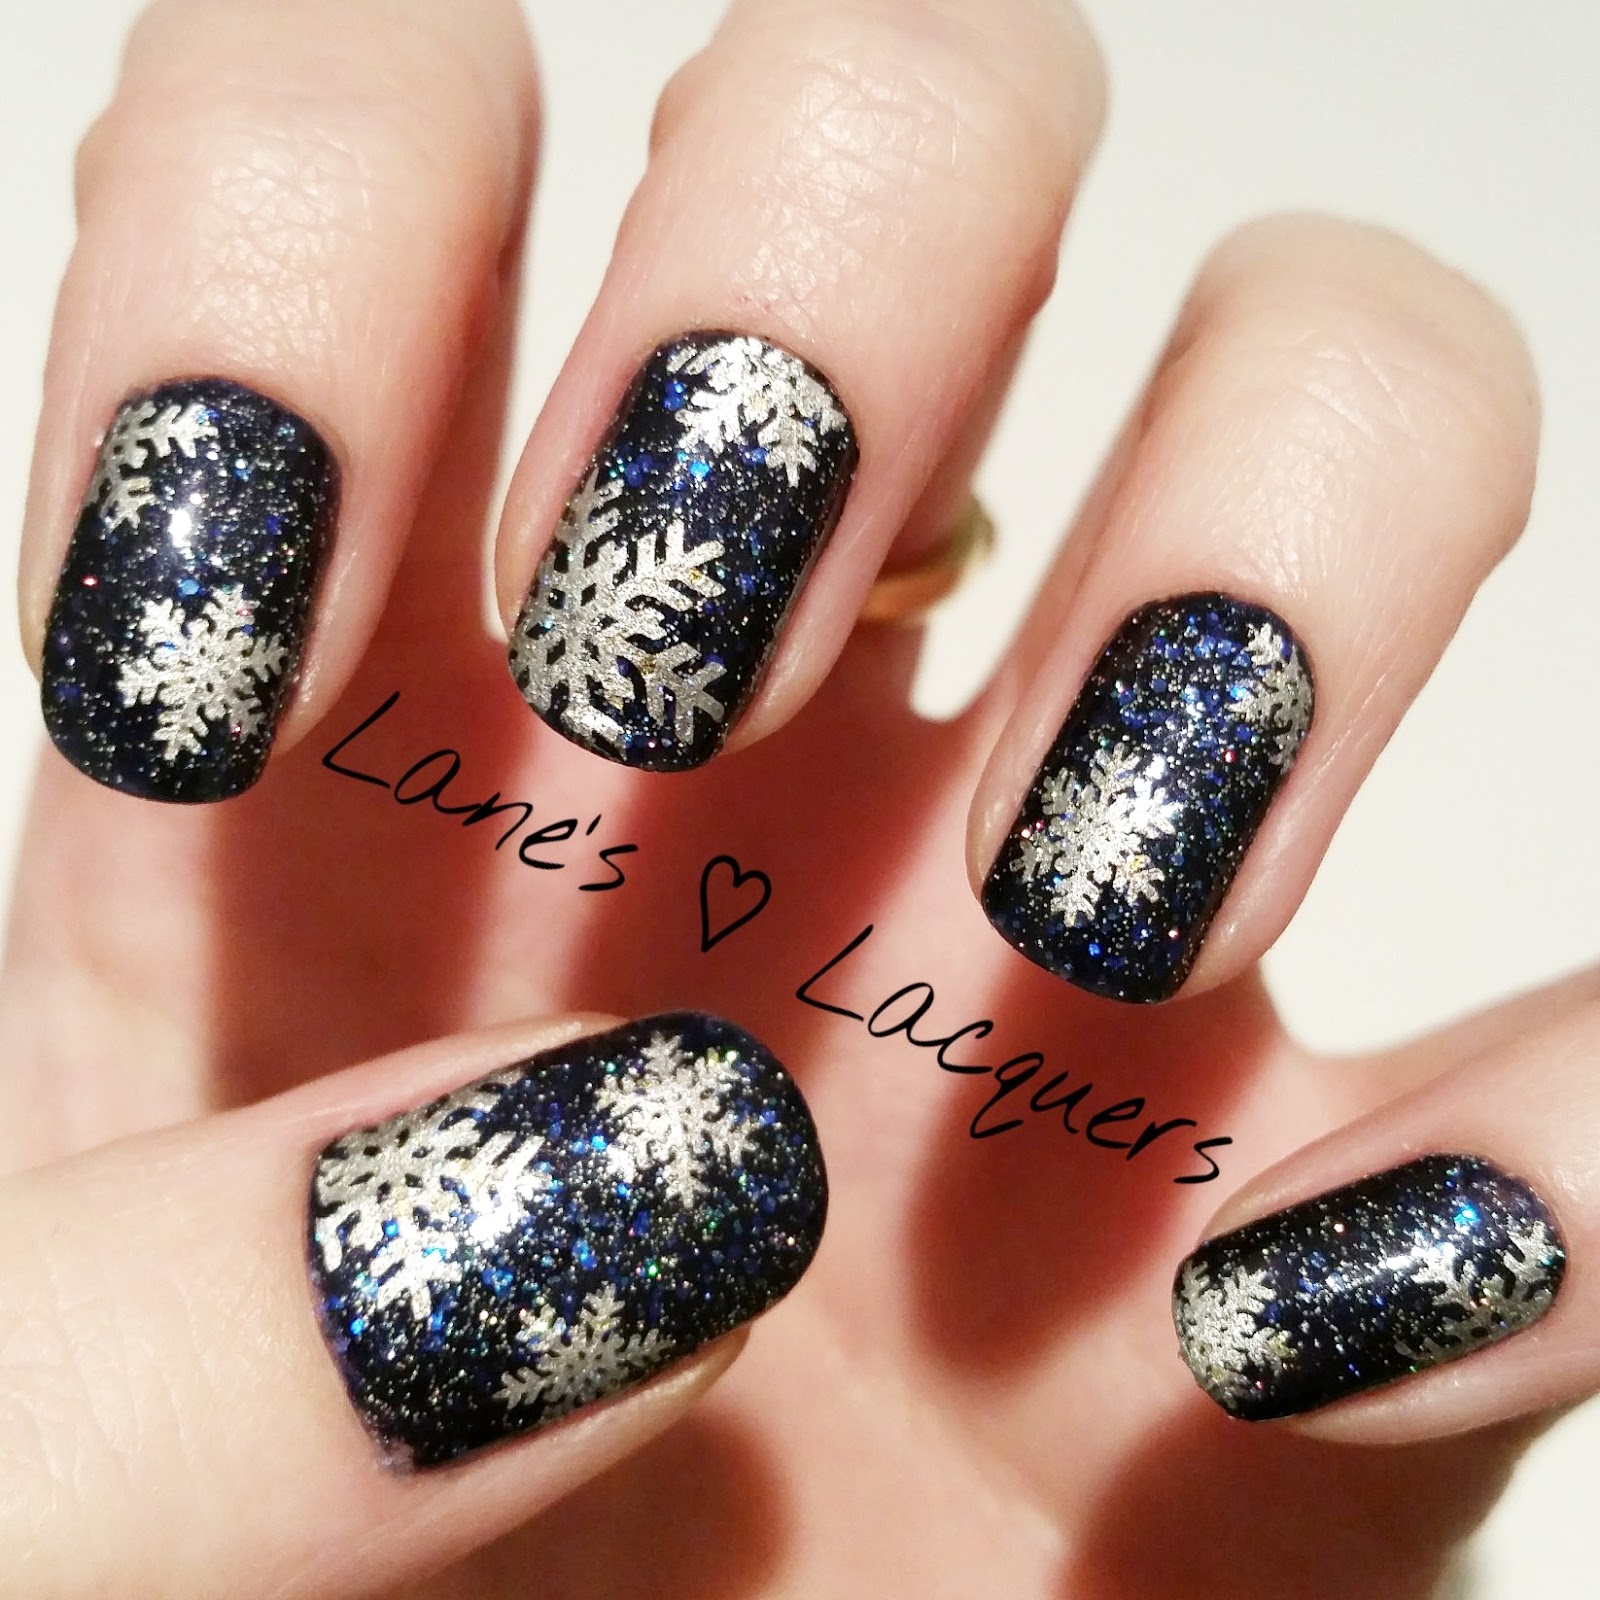 Lane's Lacquers: 40 Great Nail Art Ideas: Winter